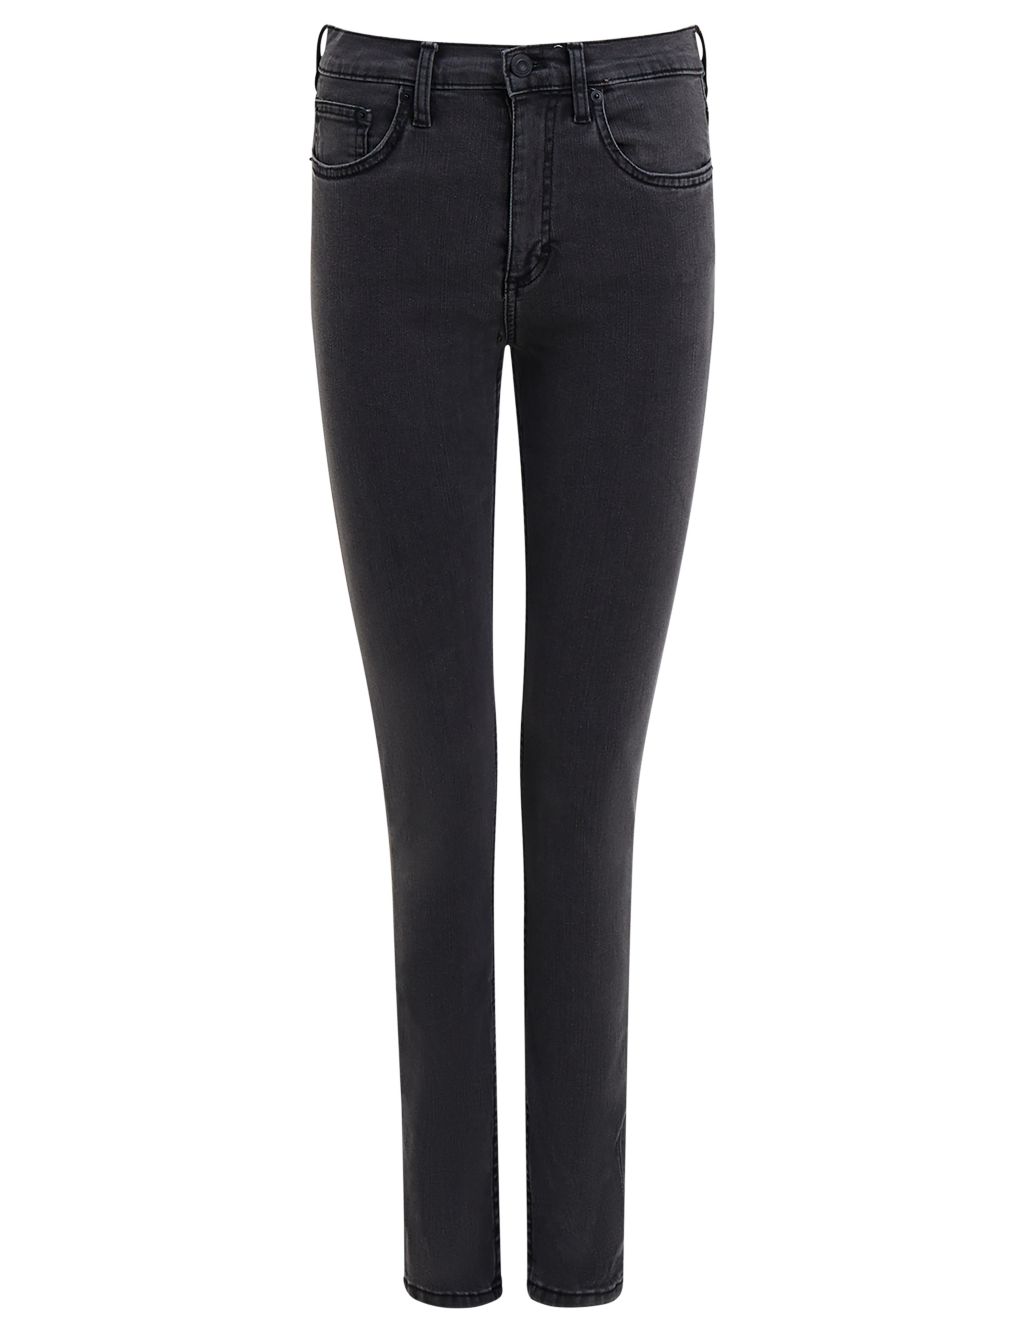 High Waisted Skinny Ankle Grazer Jeans image 2